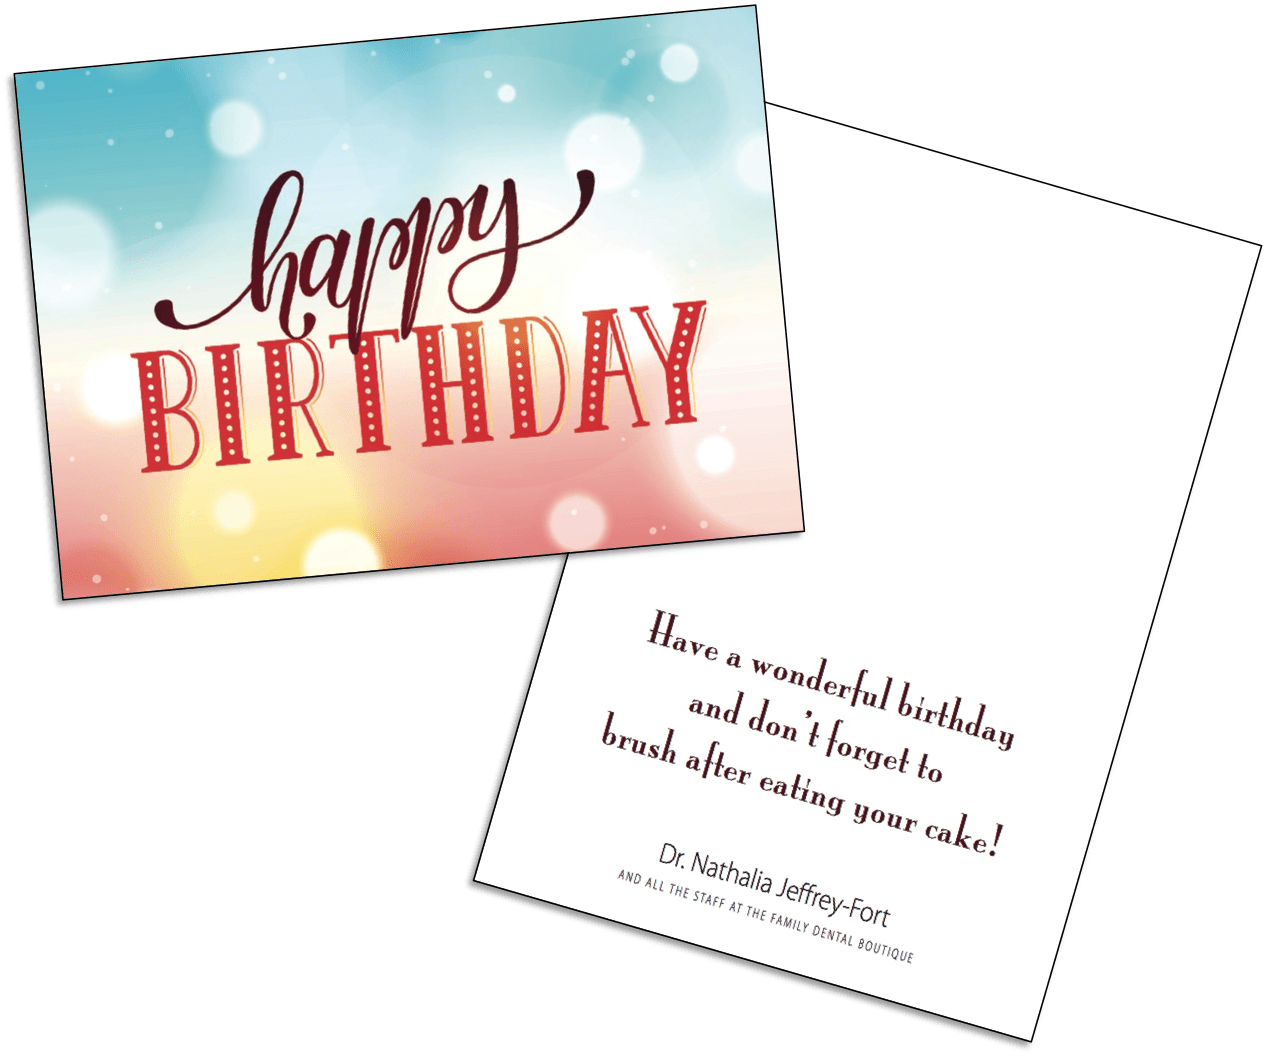 How To Build a Customer Loyalty With Business Birthday Cards - Wilson Printing USA